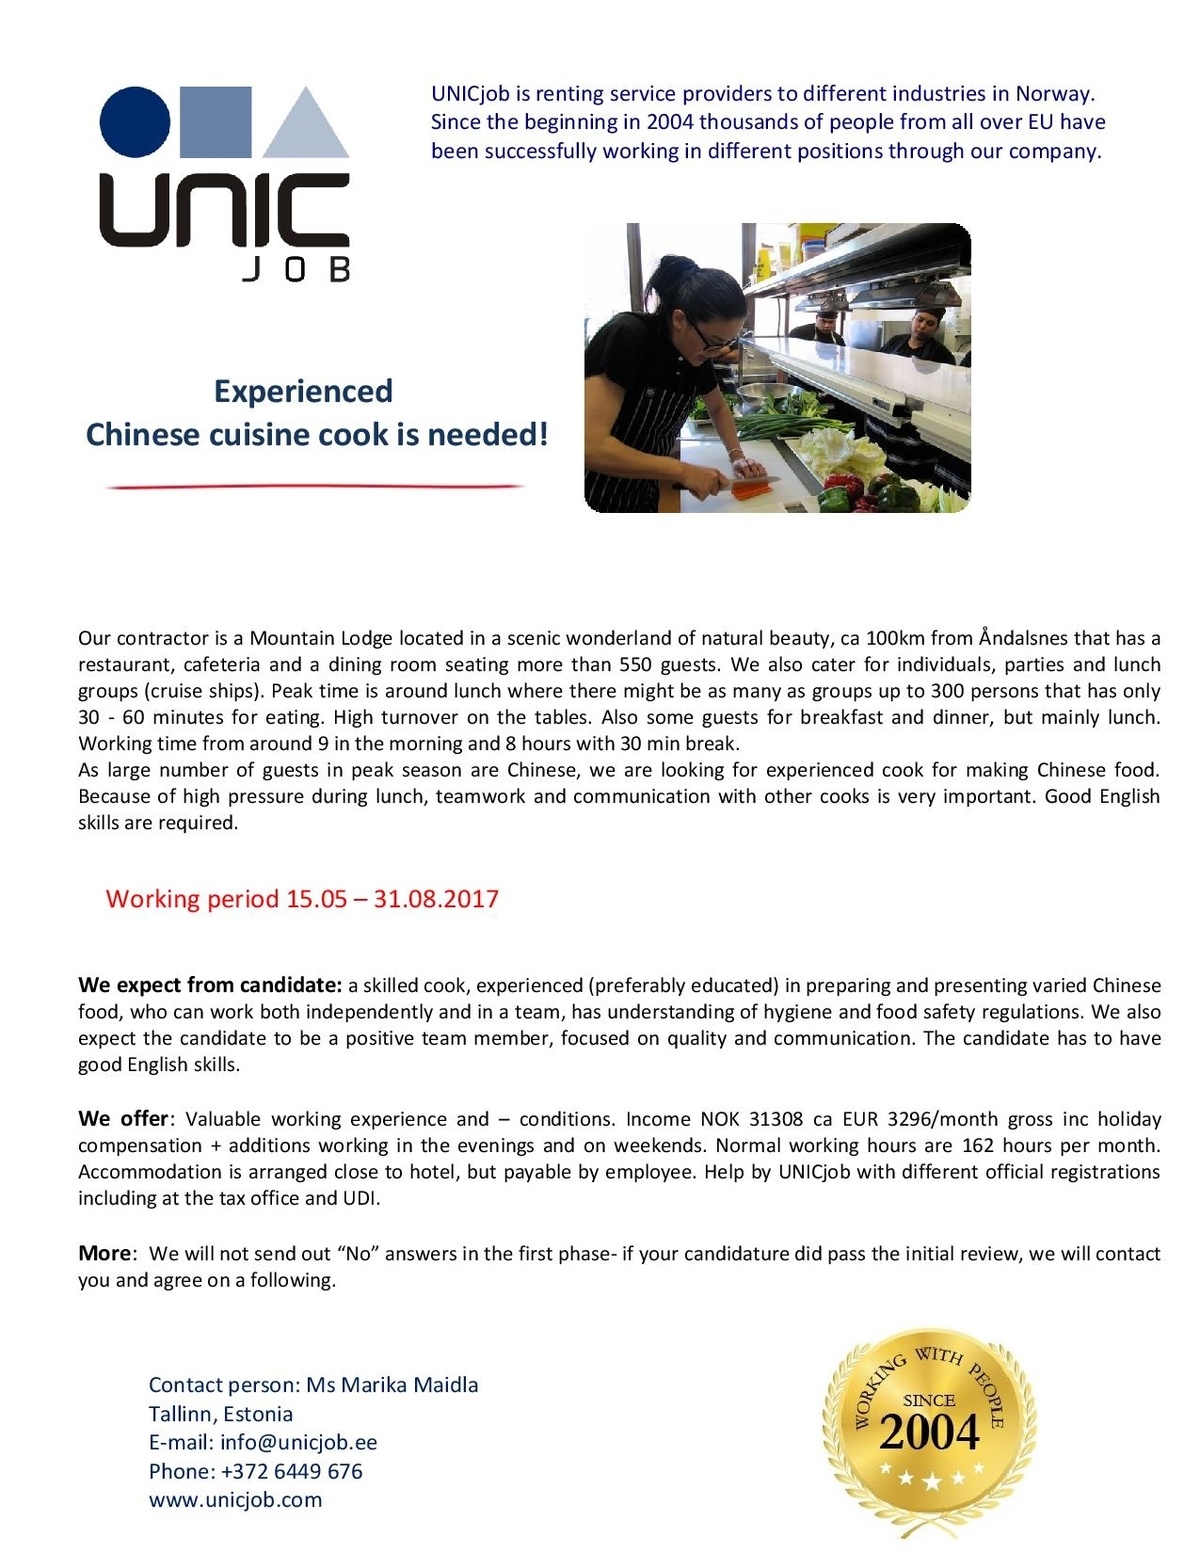 Unic Management OÜ Chinese cuisine cook to Norway 15.05 - 31.08.17